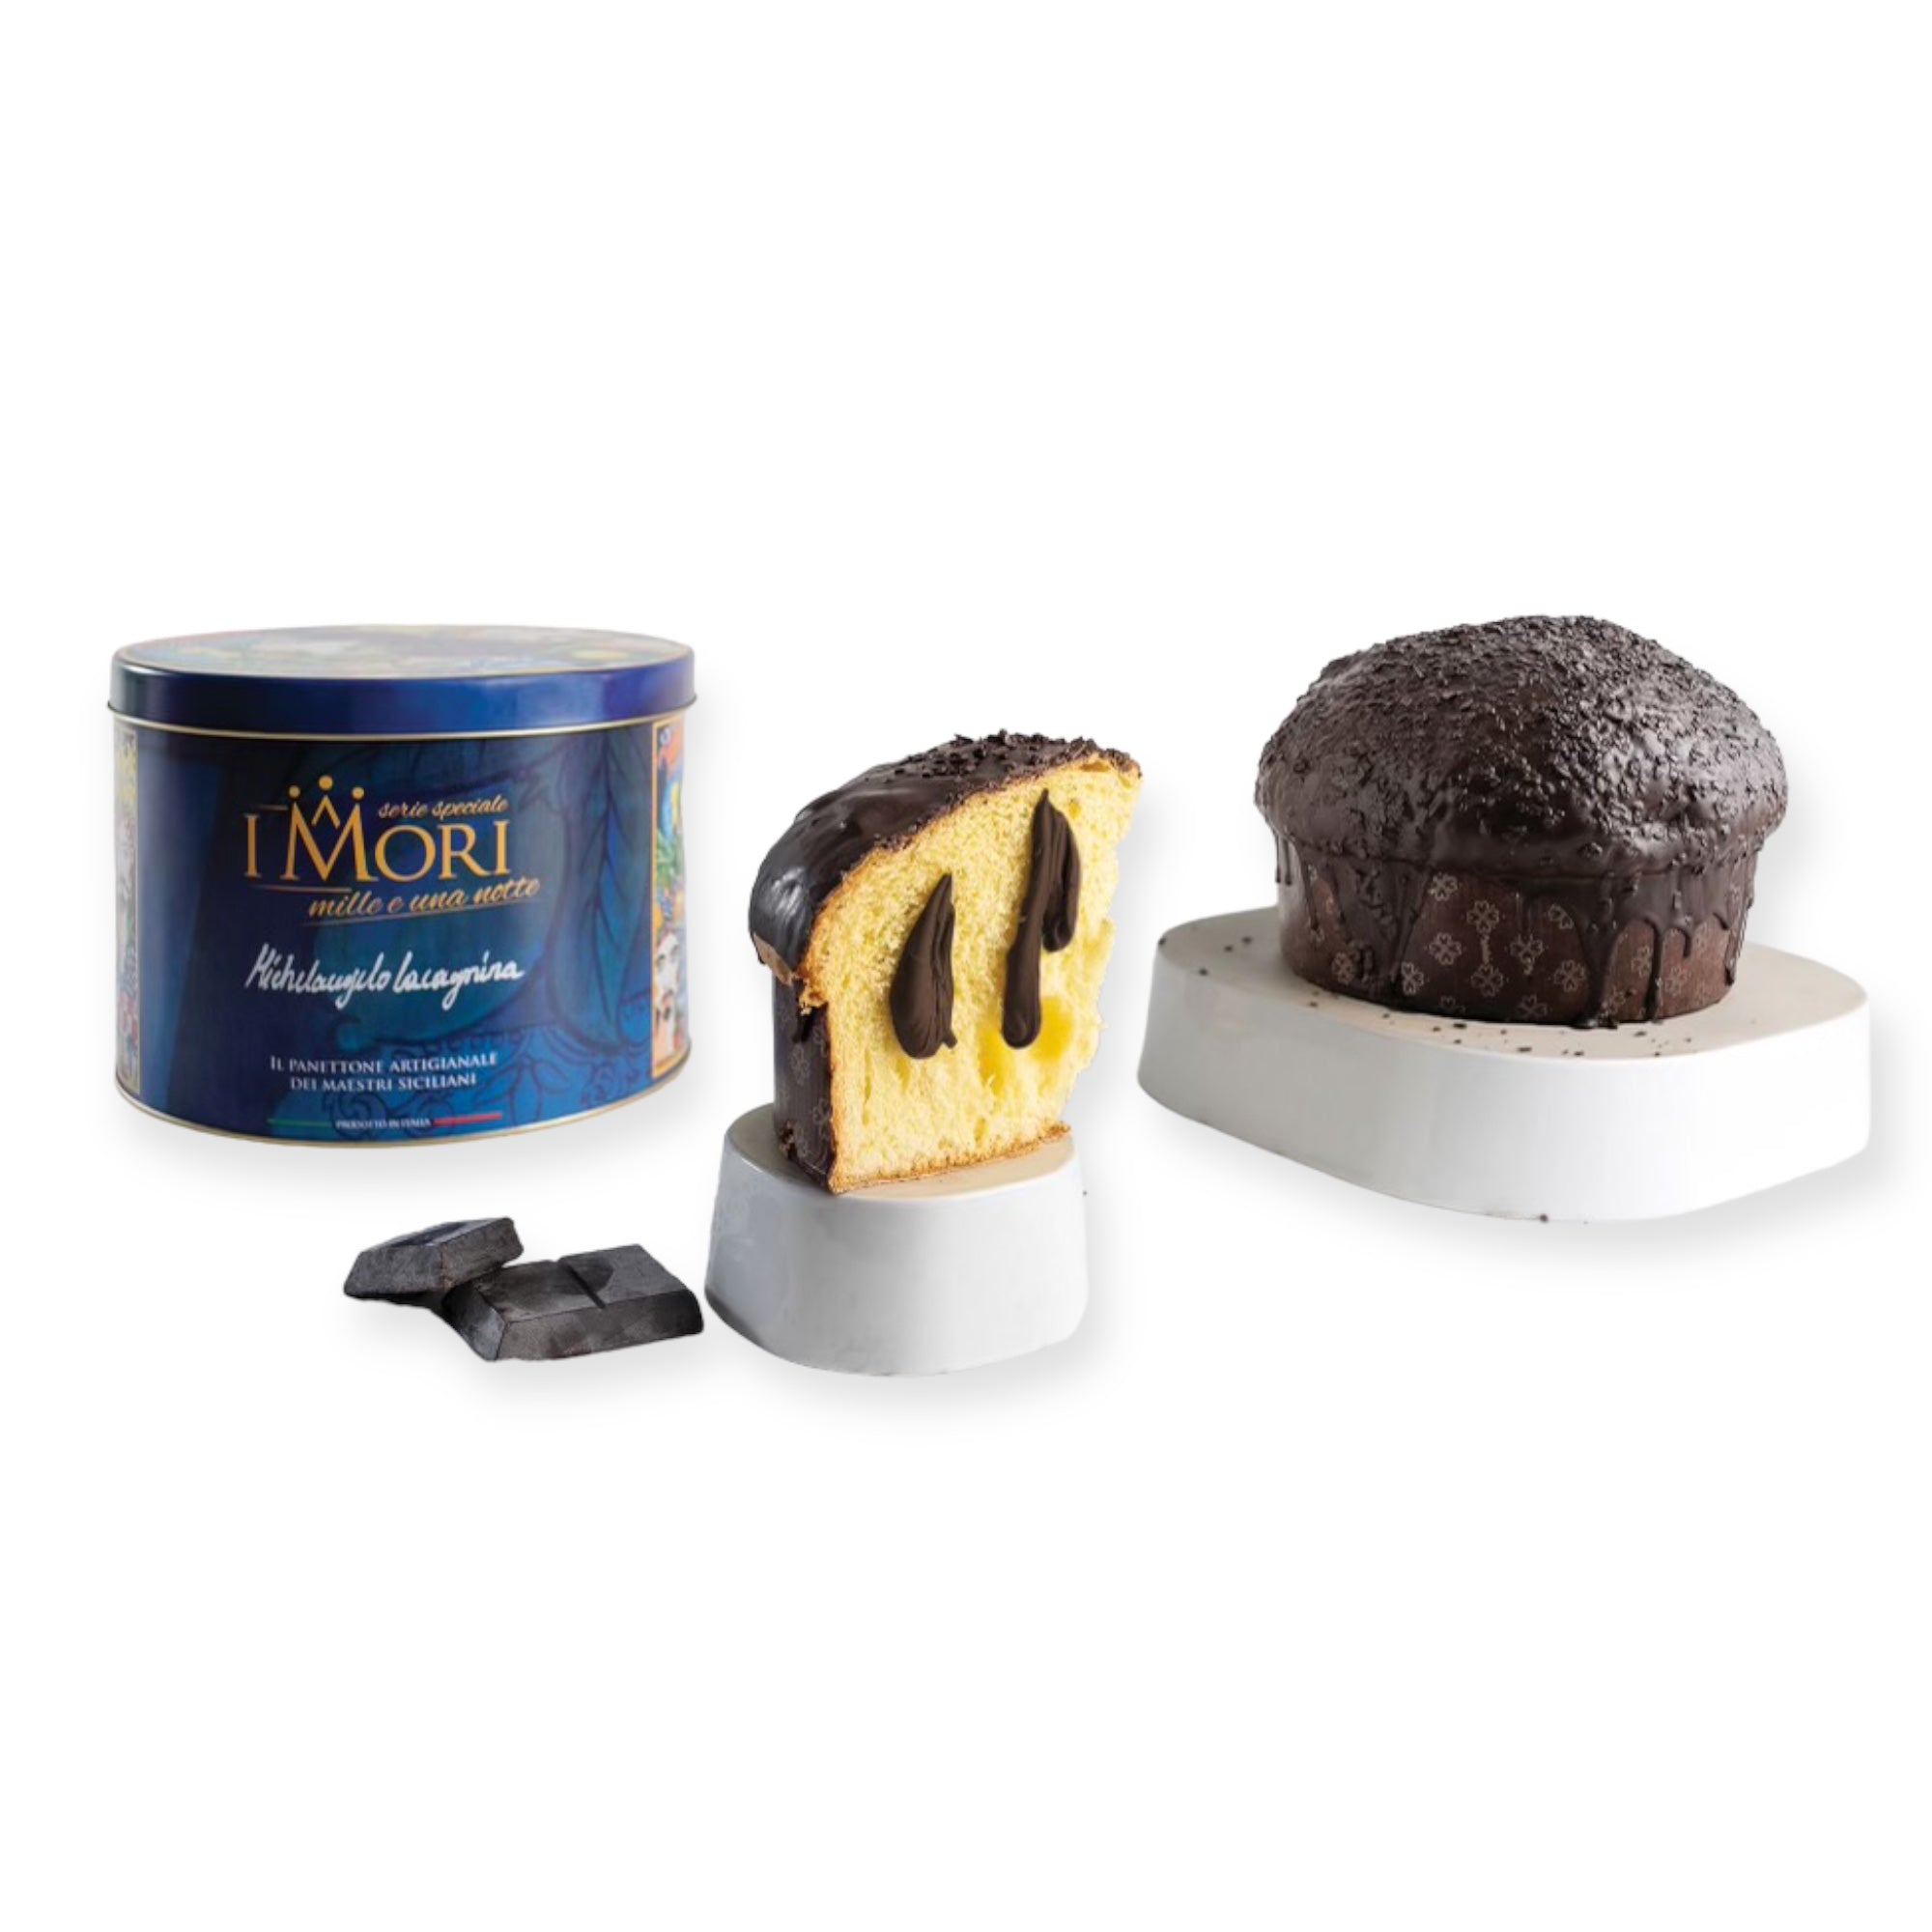 Panettone With Chocolate Cream From Modica 1kg With A Collectible Tin By I Mori